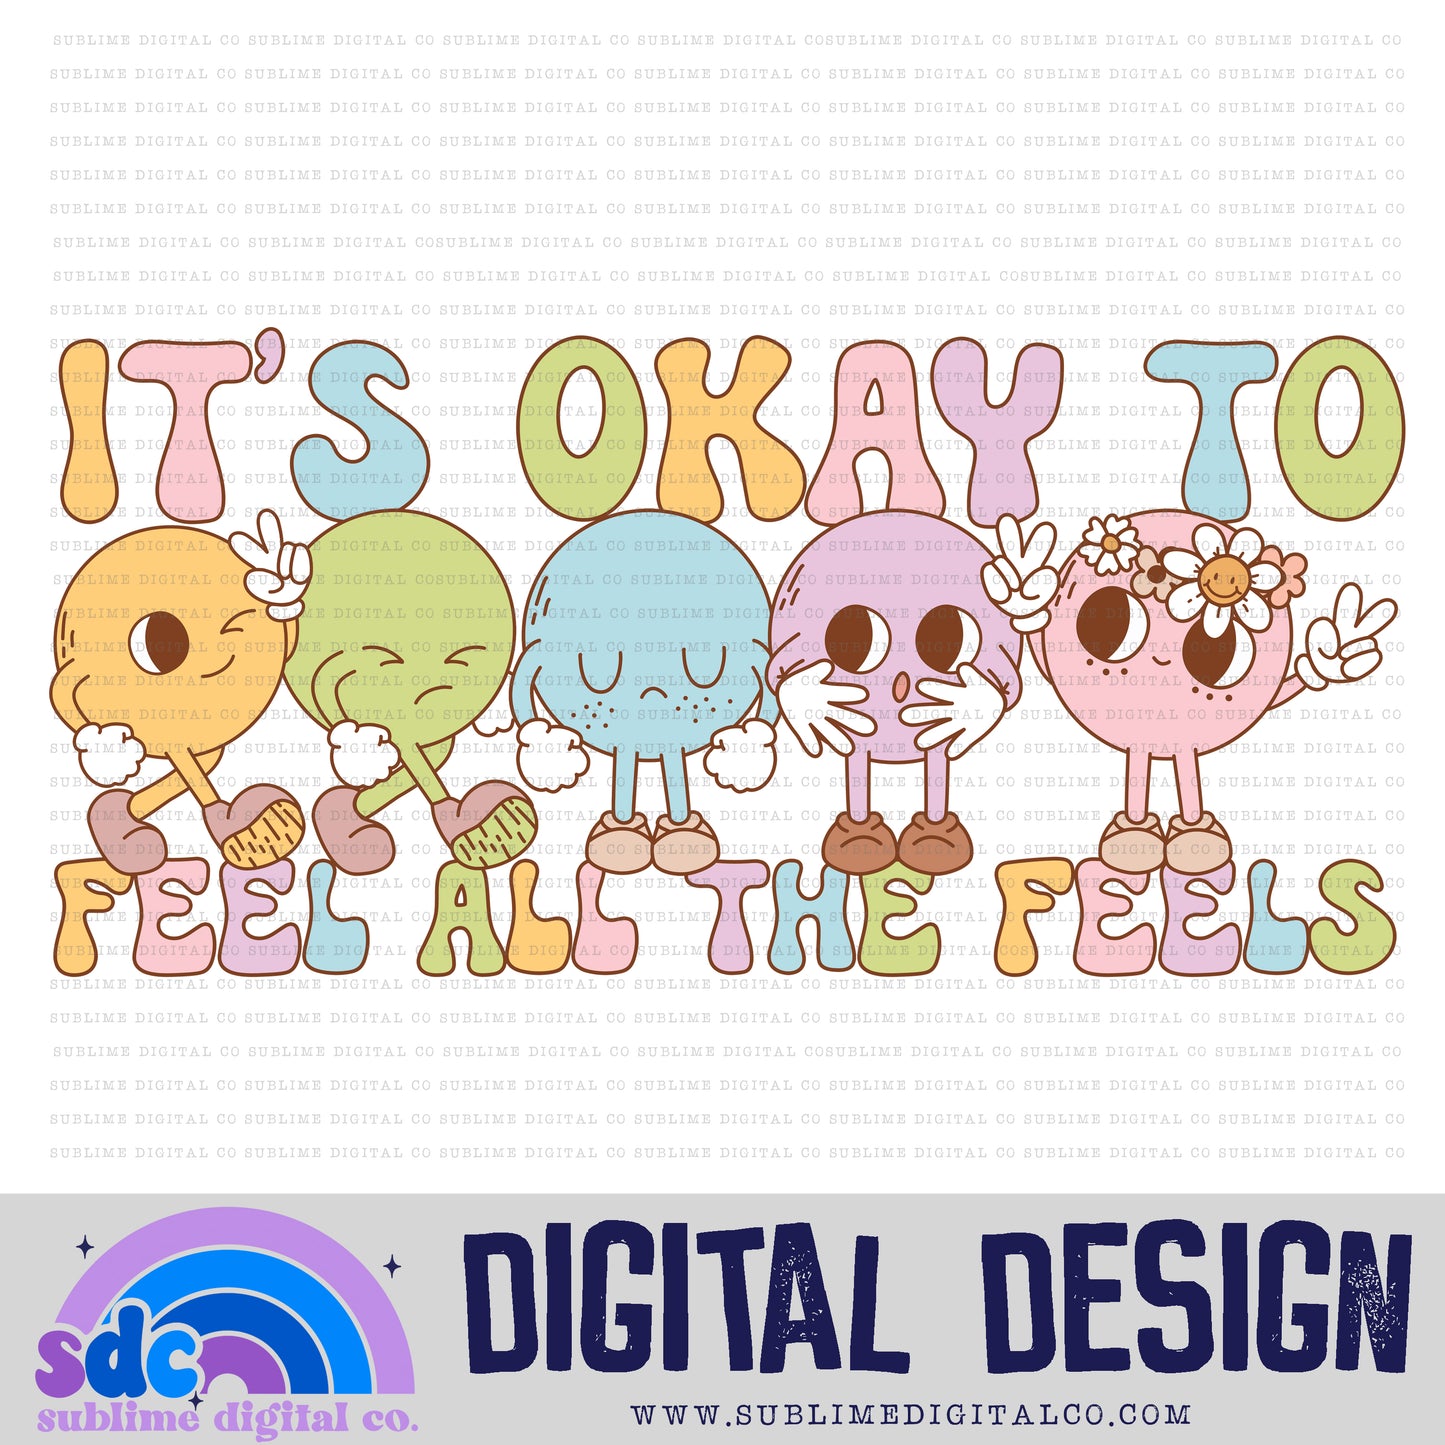 It's Okay To Feel All The Feels • Retro • Mental Health Awareness • Instant Download • Sublimation Design